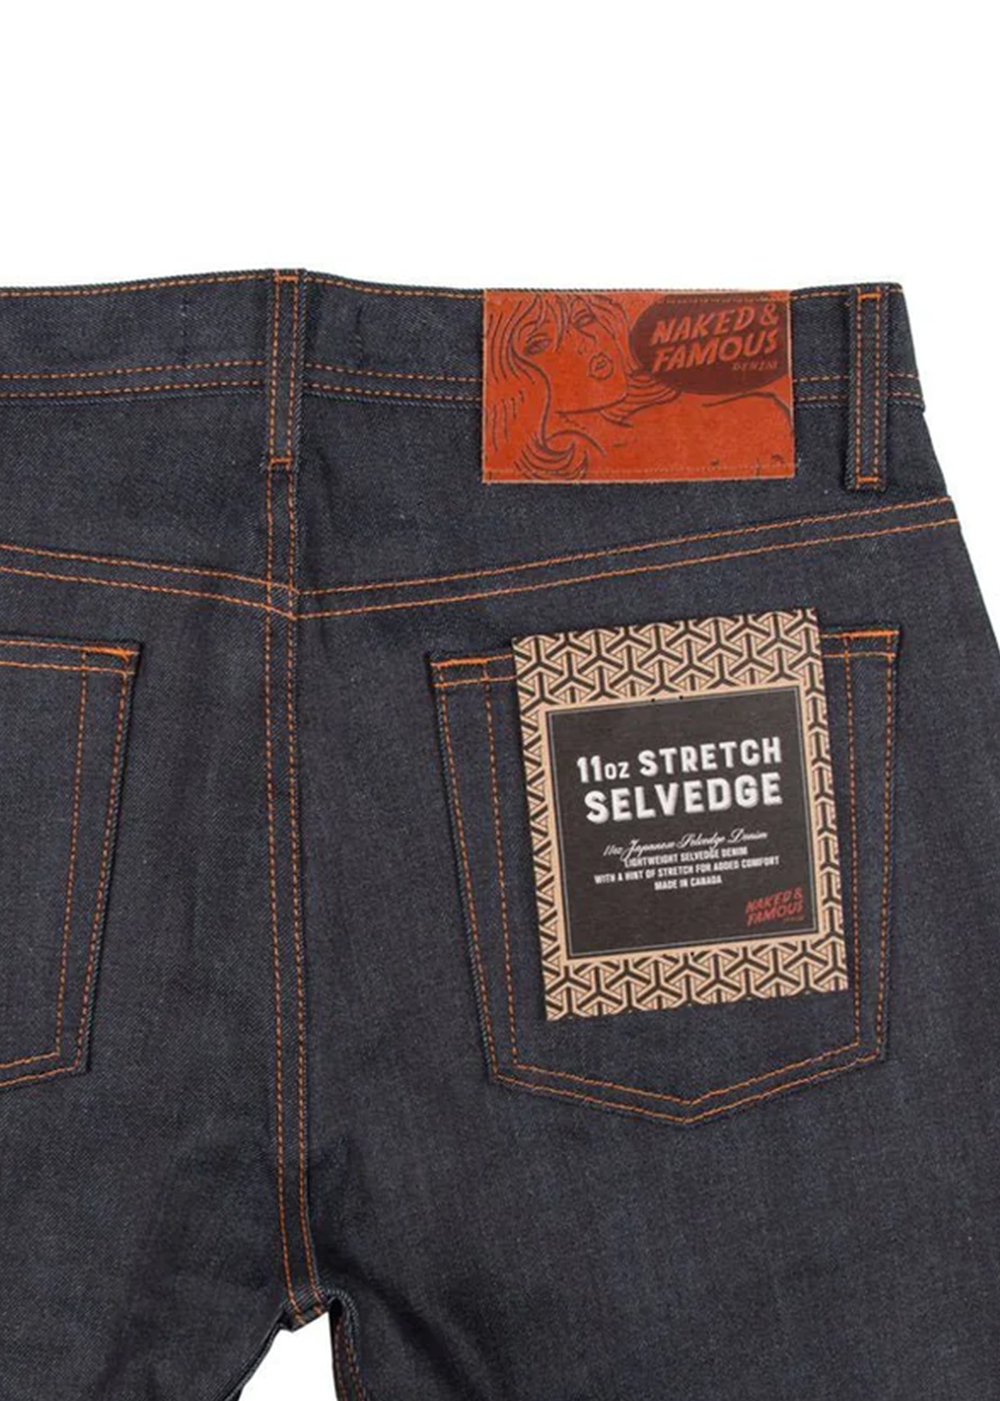 Super Guy - 11oz Stretch Selvedge - Naked and Famous Denim Canada - Danali - 015500